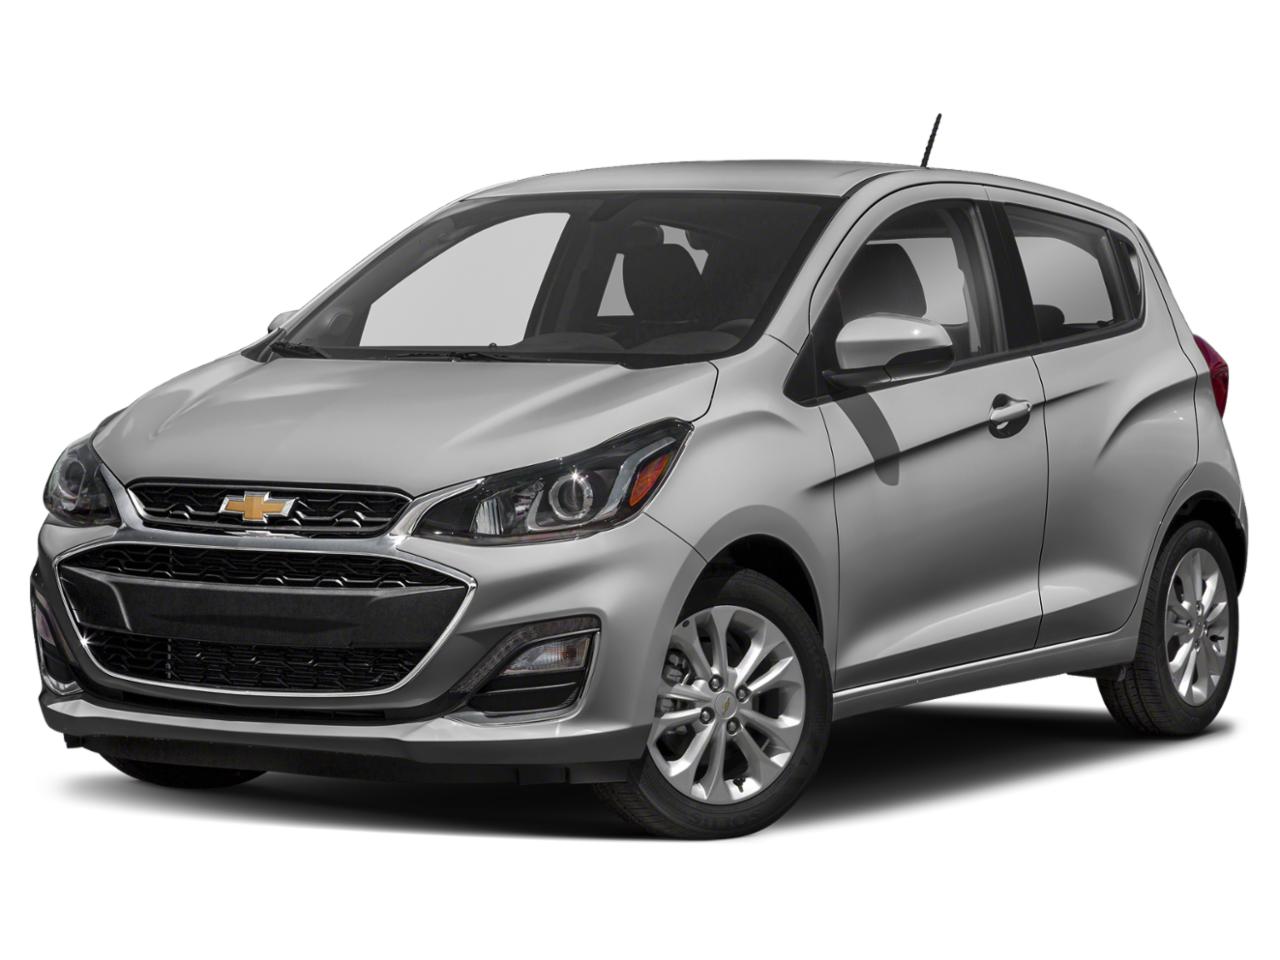 2020 Chevrolet Spark Vehicle Photo in Plainfield, IL 60586